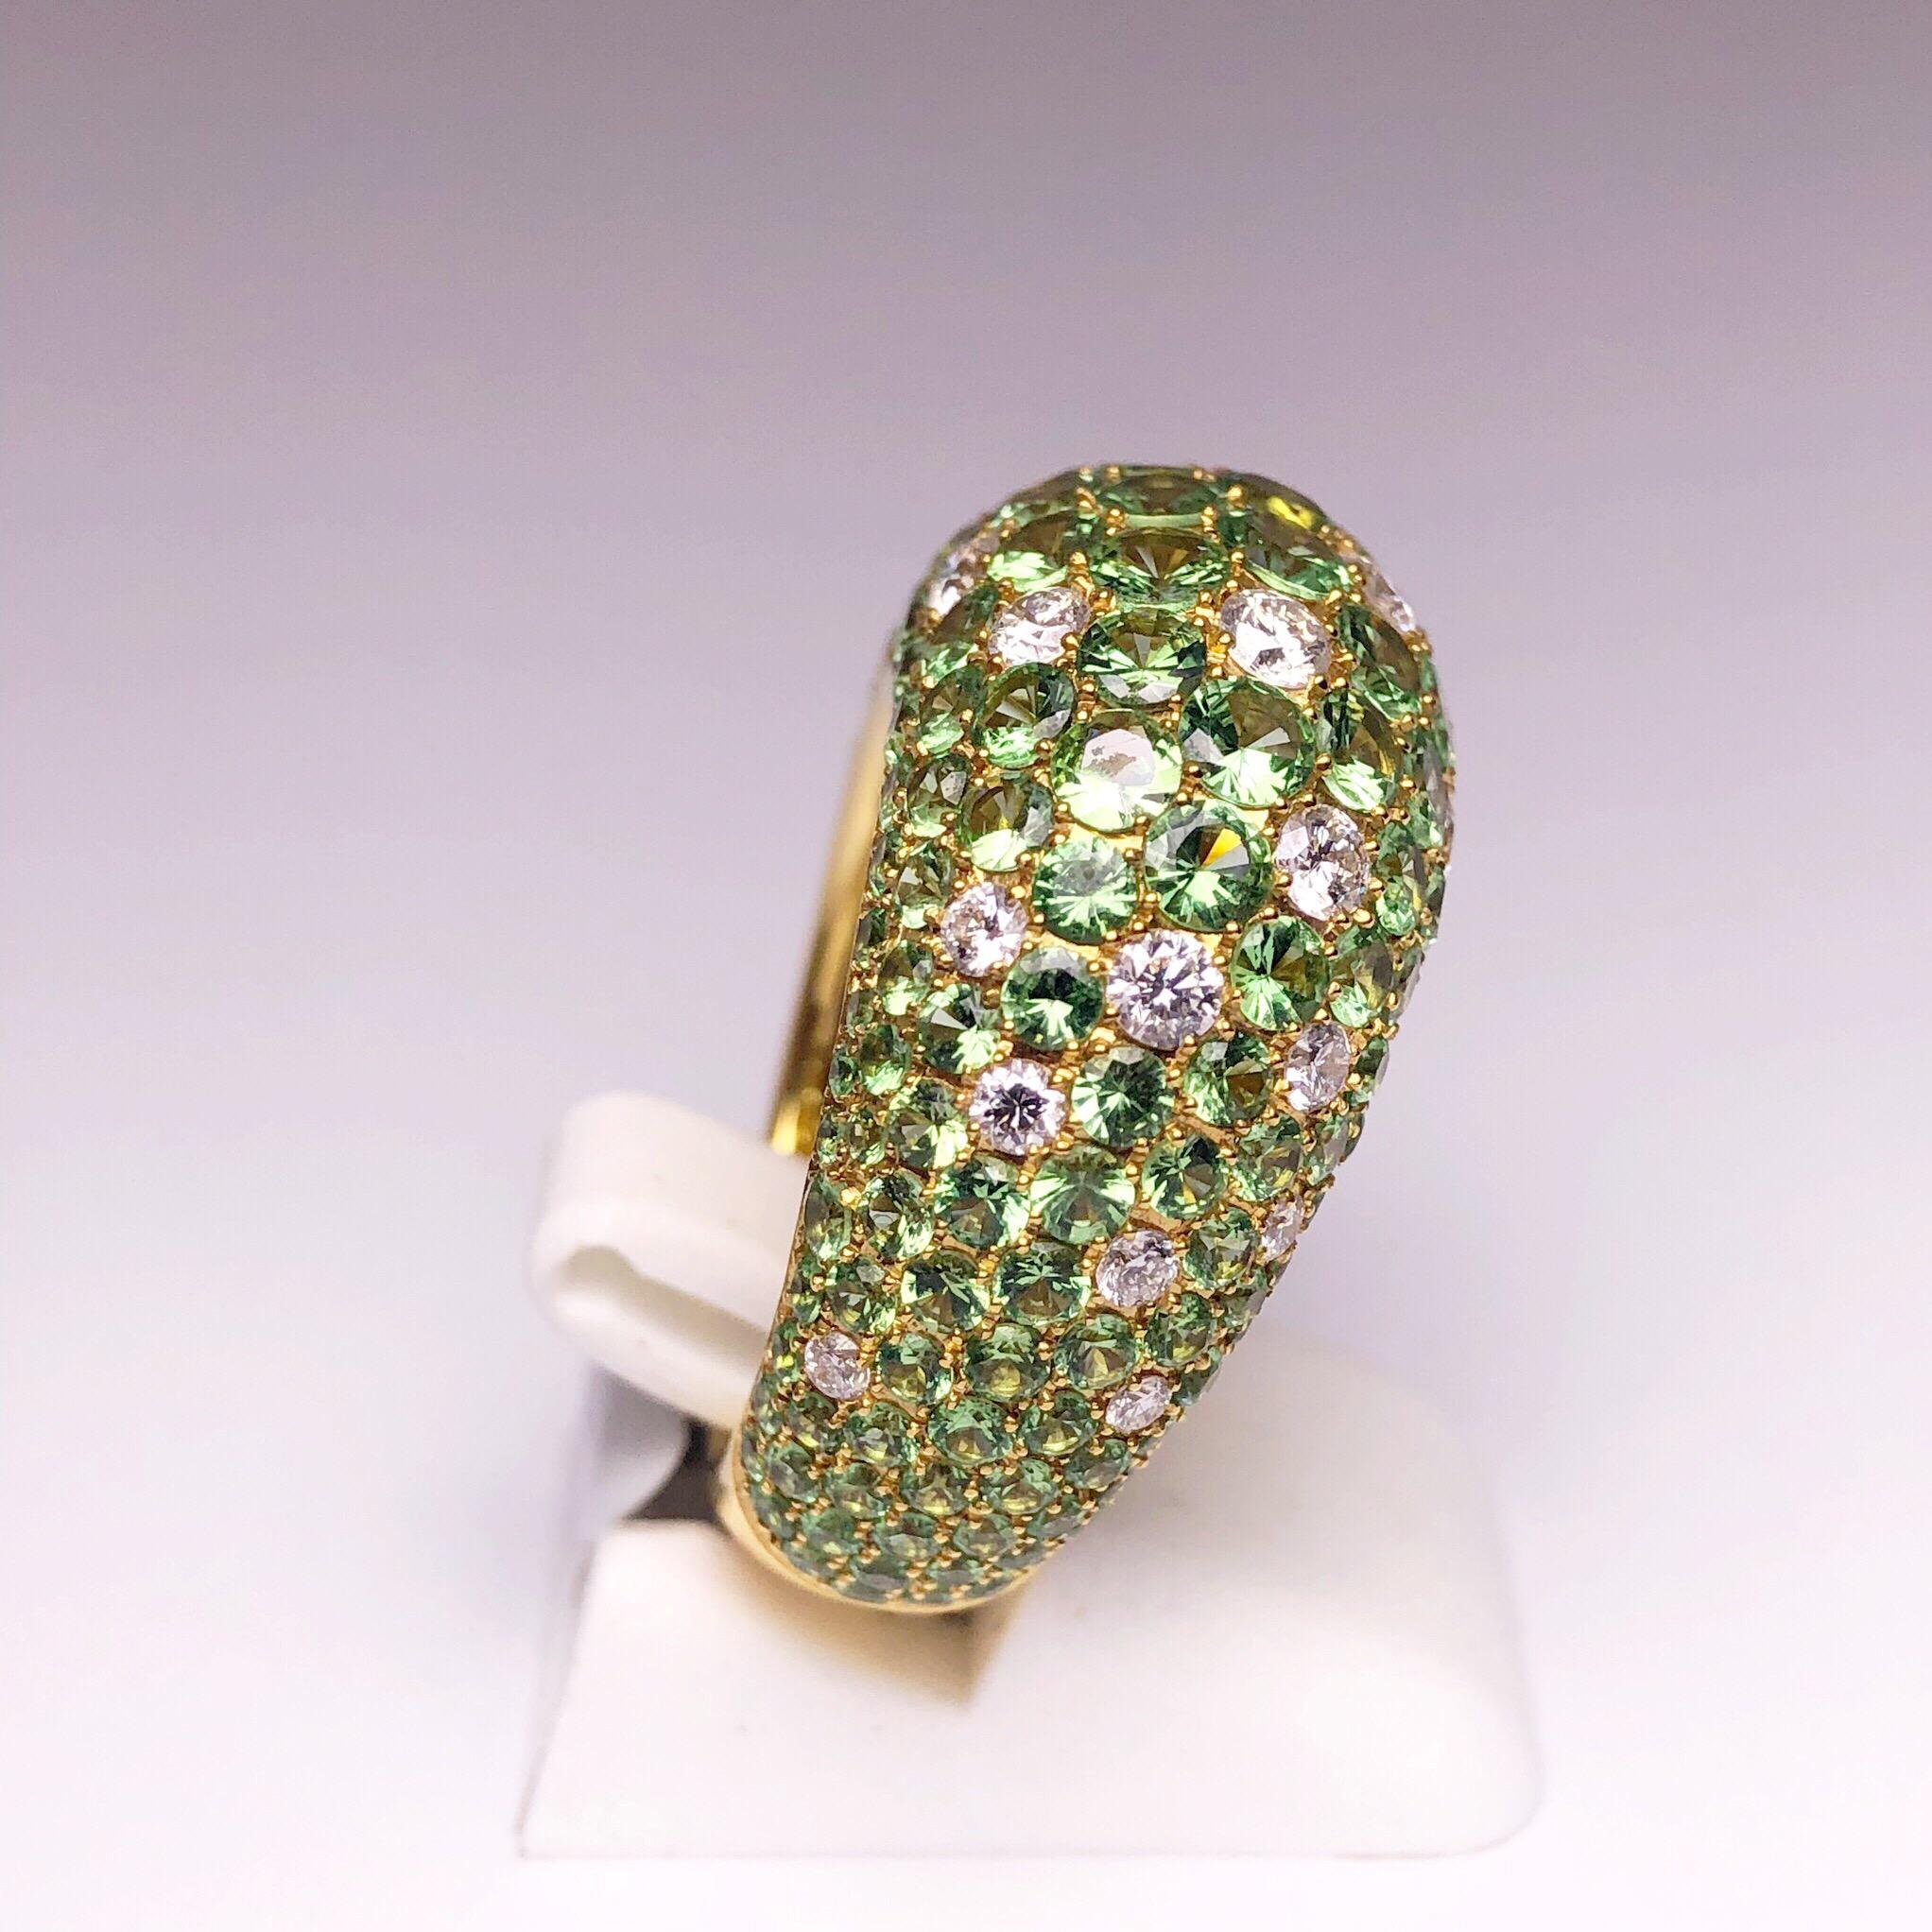 Crafted by the renowned Stenzhorn house of Jewellery, This classic 18kt yellow gold ring is pave' set with 8.20 carats of round green Tsavorite stones. Sprinkled throughout are round white brilliant cut Diamonds weighing .90 carats. The domed shaped